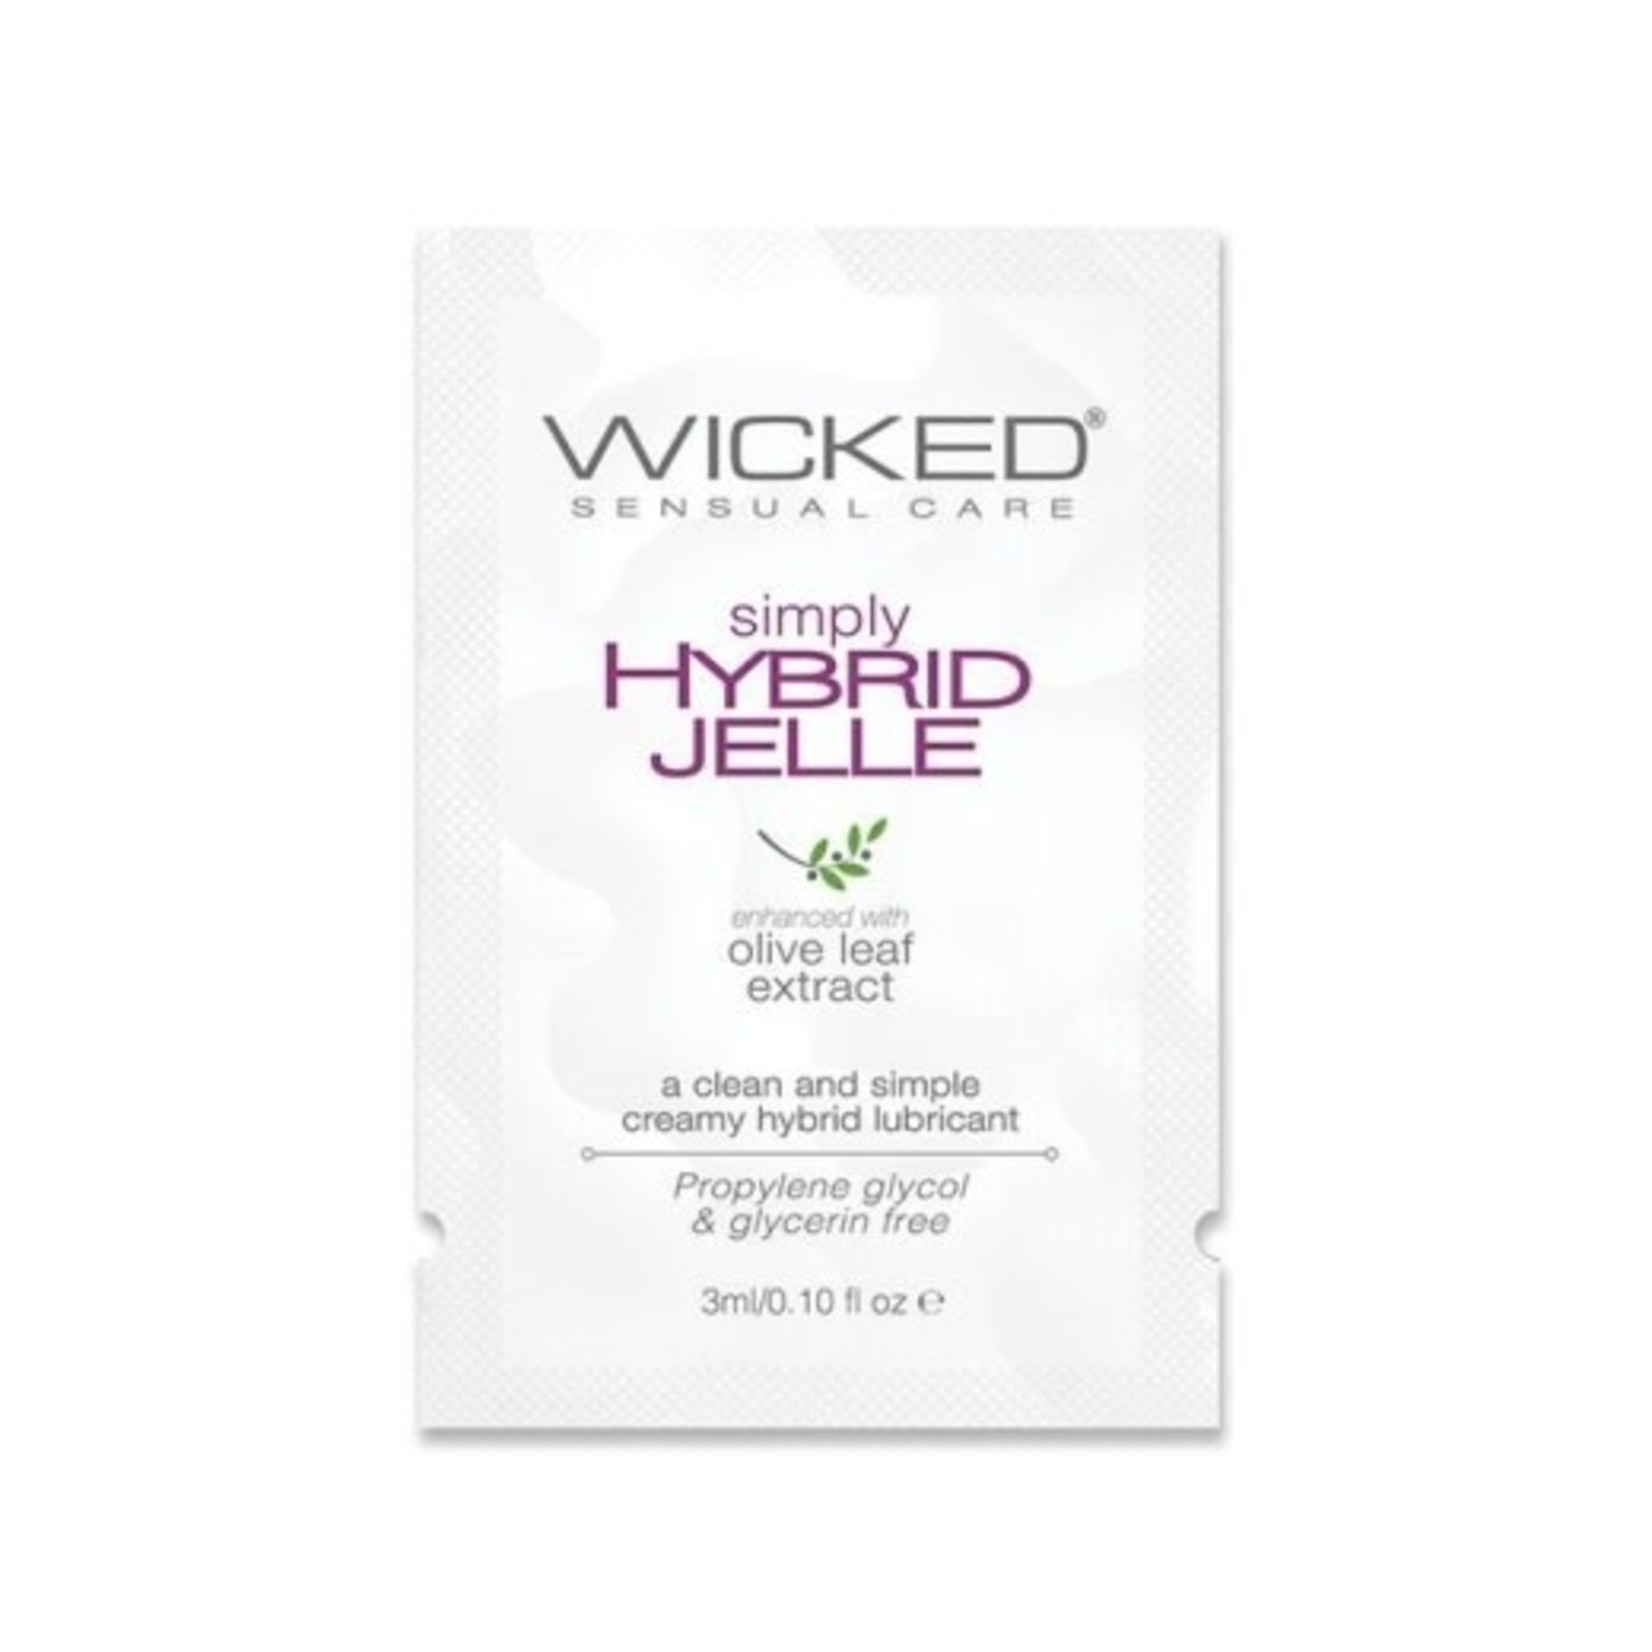 WICKED - PACKET SIMPLY HYBRID JELLE - 3 ML